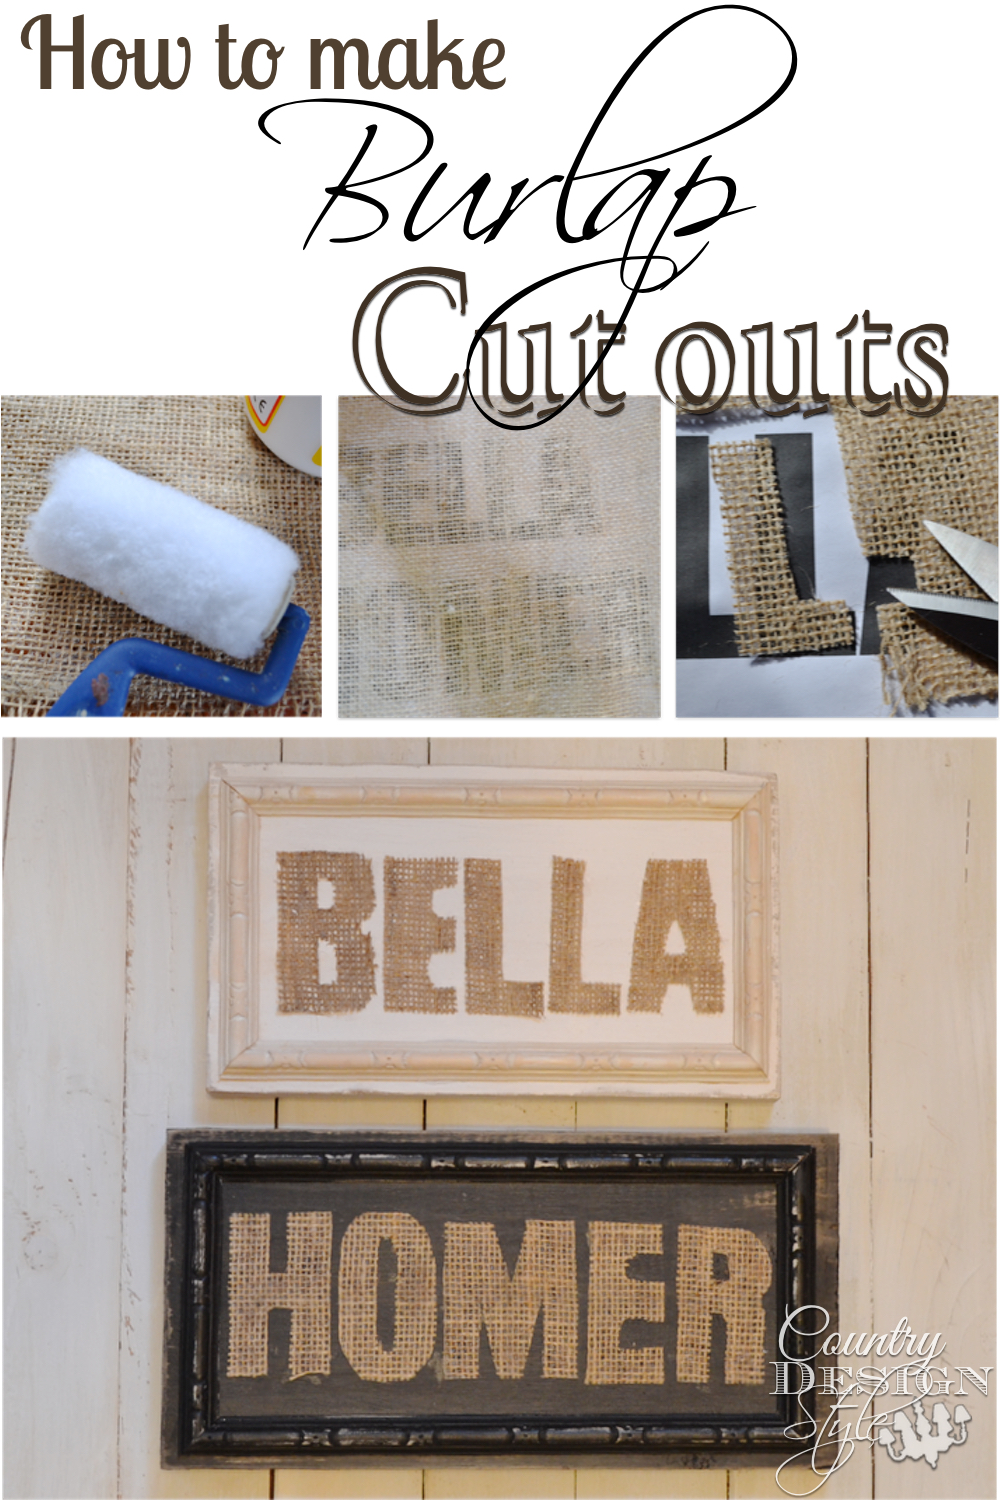 How to make burlap cut outs easy and DIY your own burlap and wood signs. Country Design Style